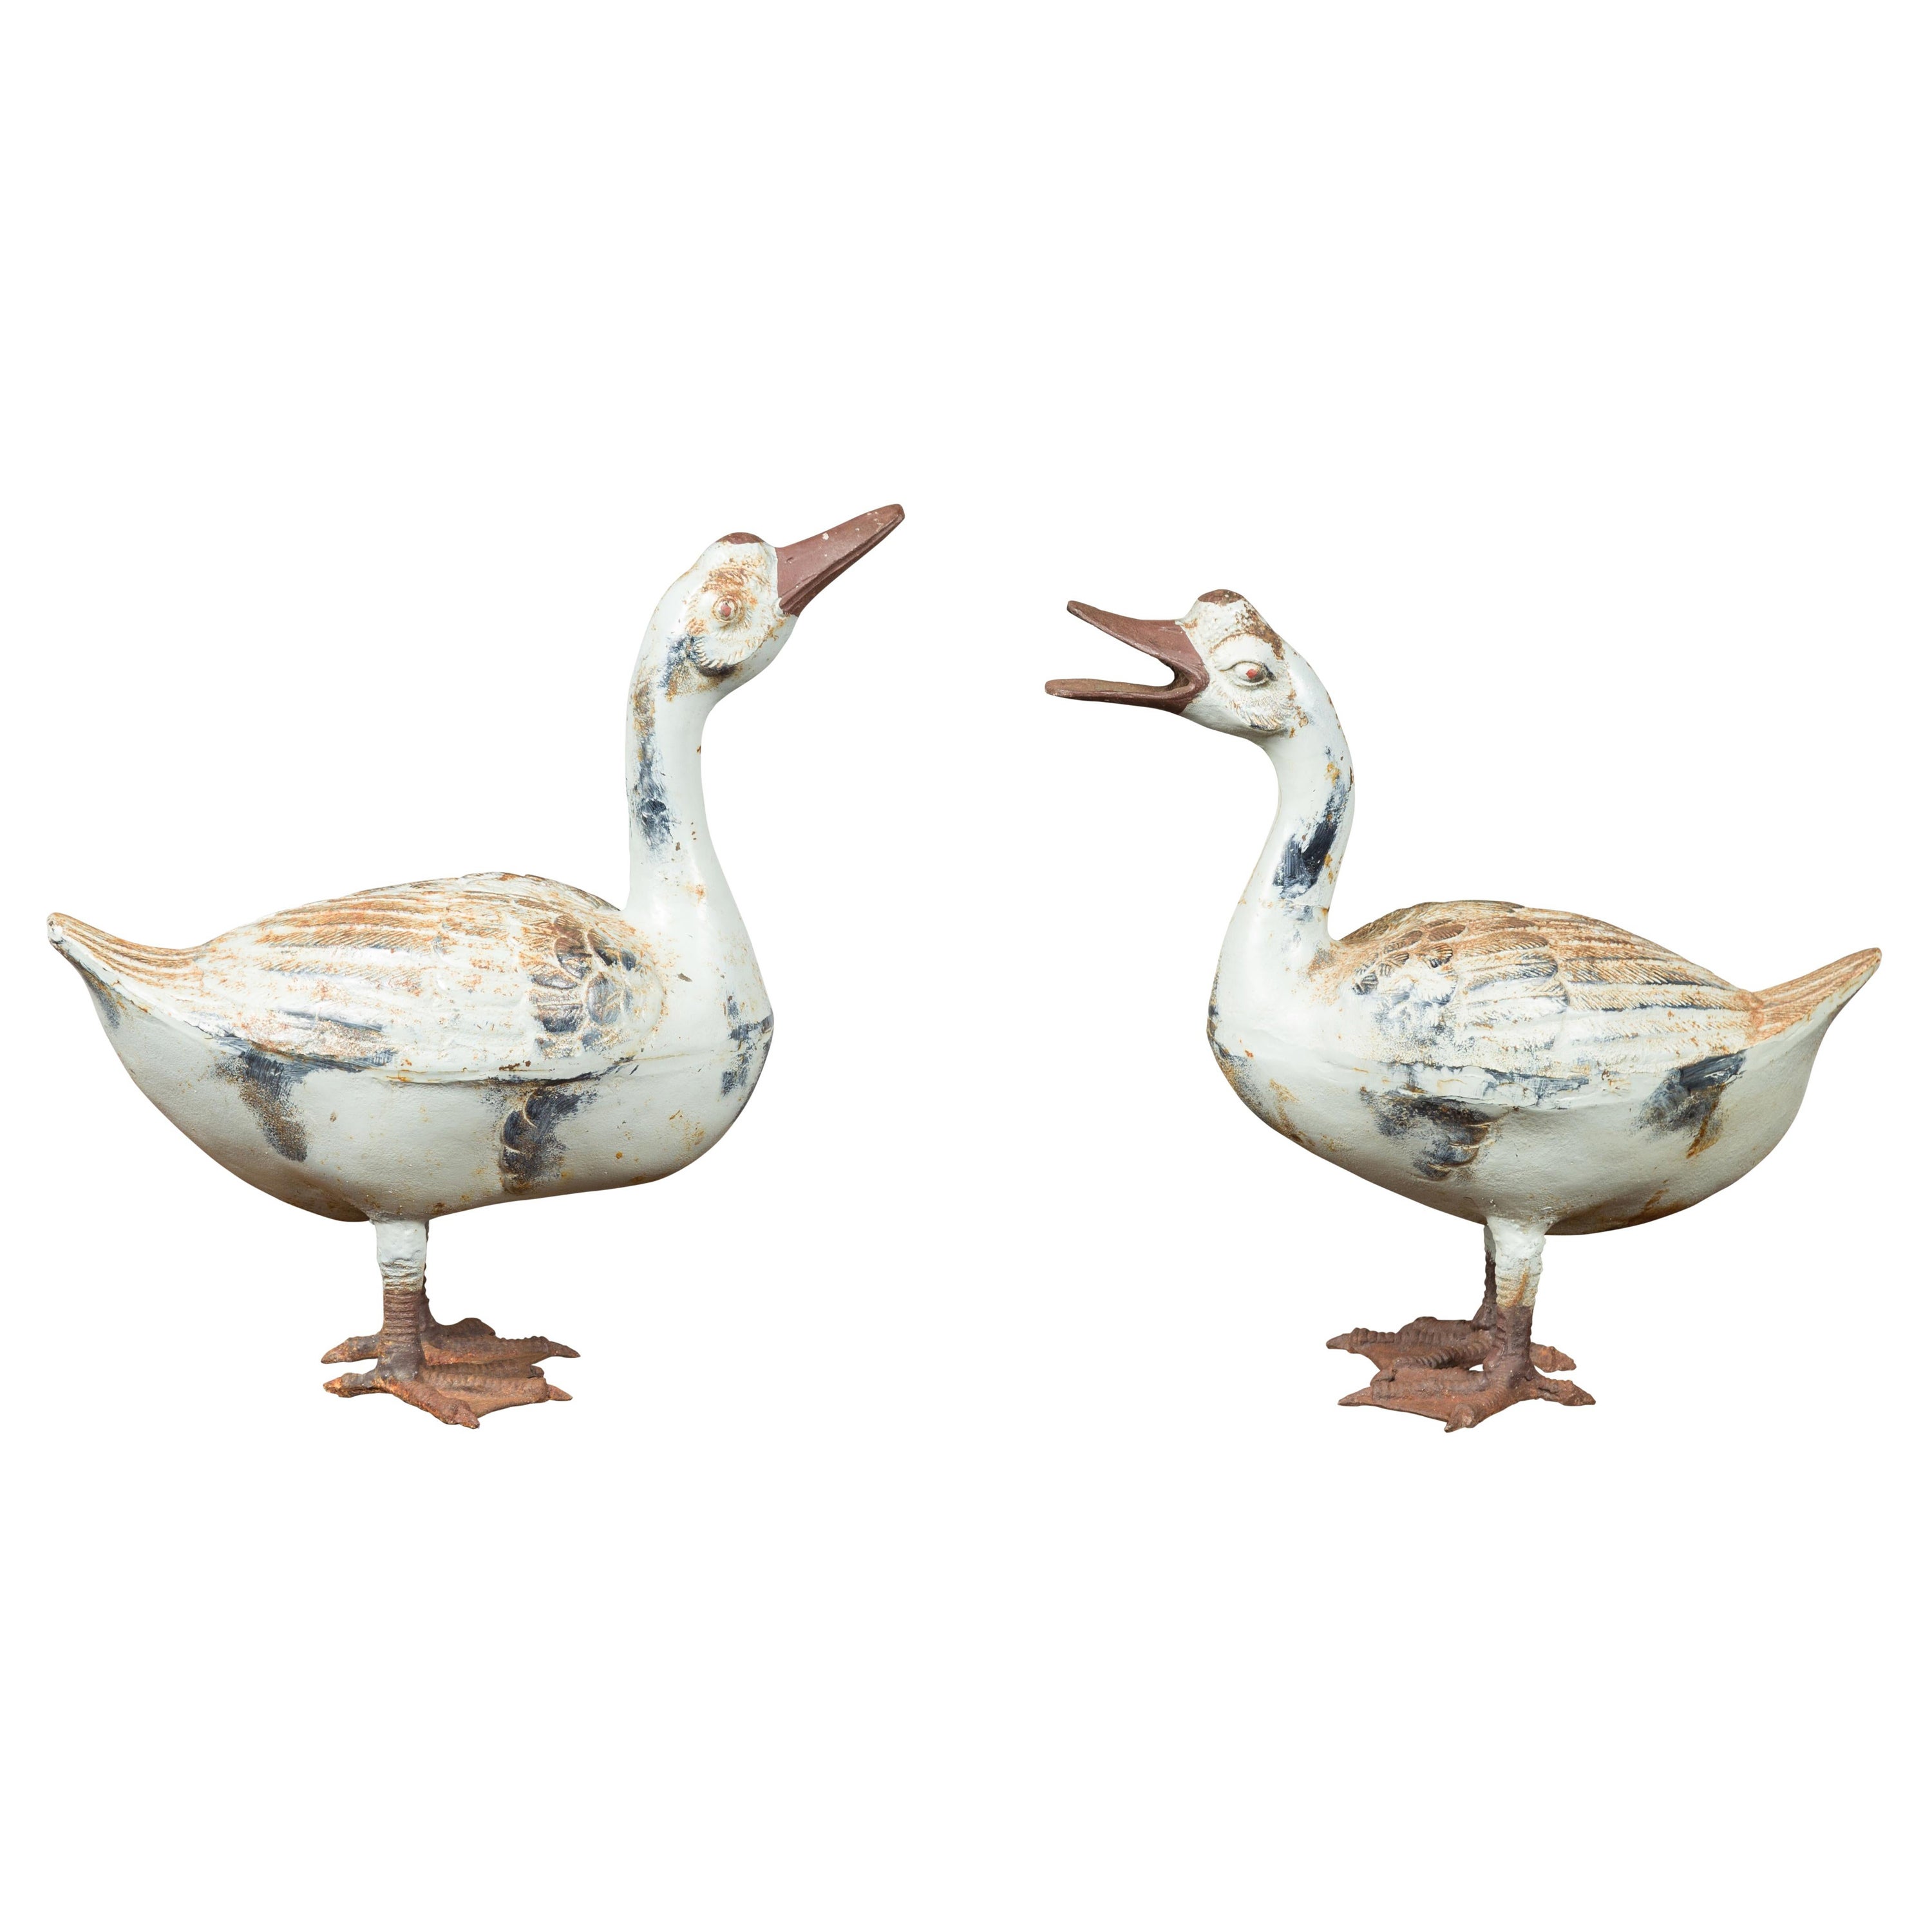 Pair of Vintage American Midcentury Iron Duck Sculptures with Weathered Patina For Sale